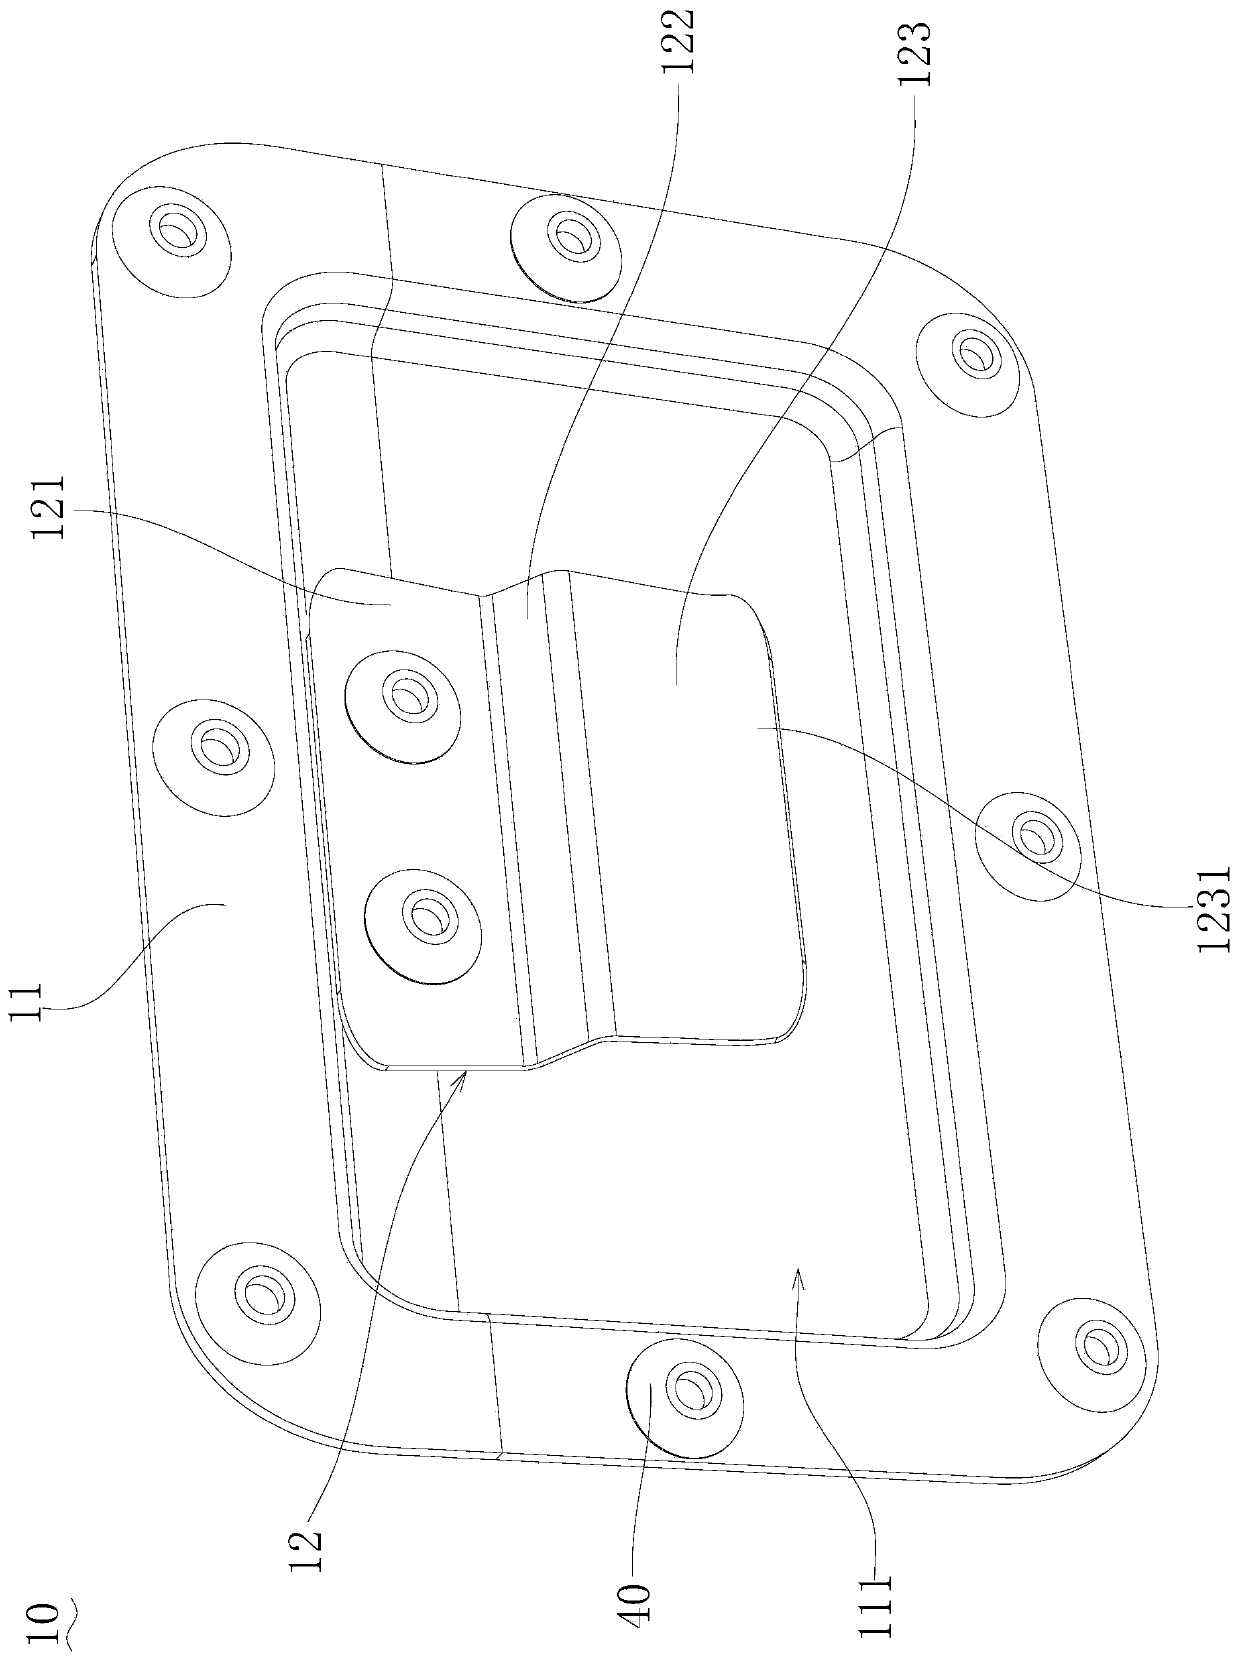 Packaging box connecting device